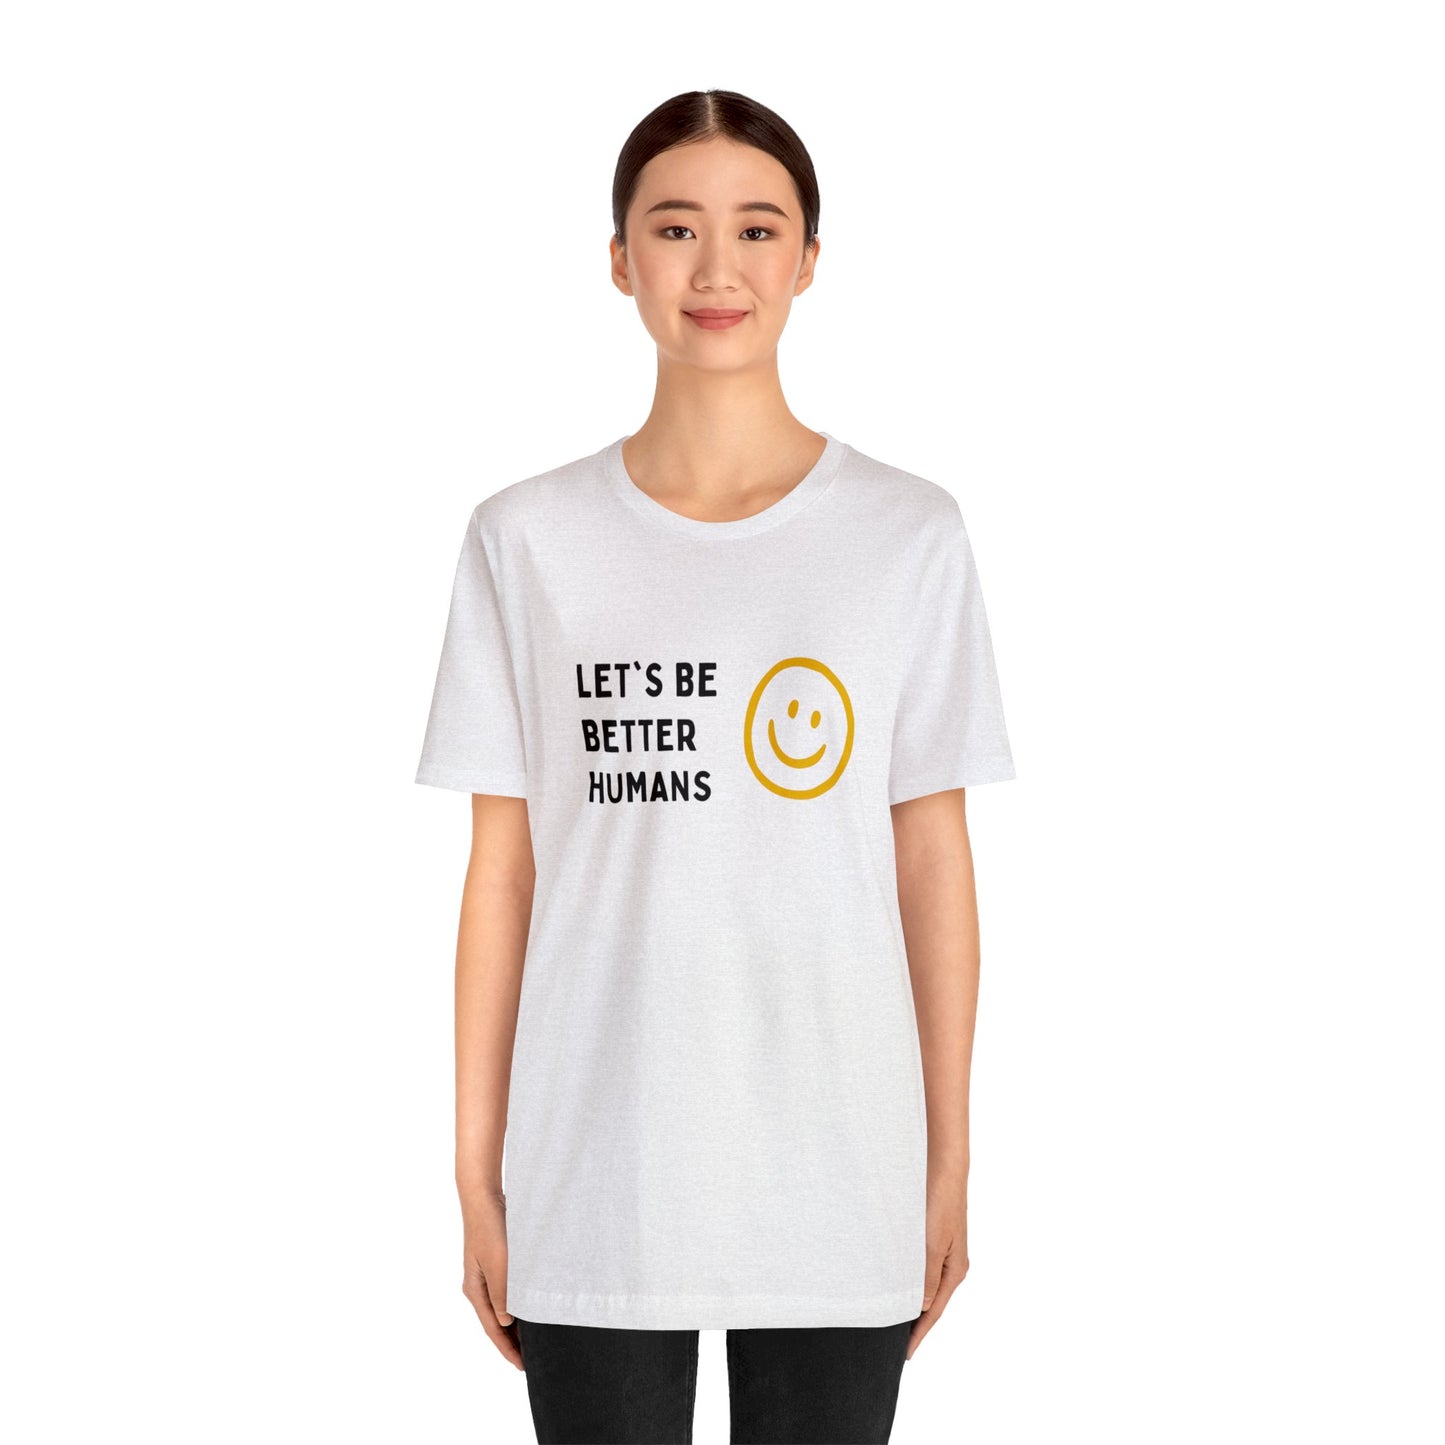 'Let's be Better Humans' Unisex Cotton T-shirt - Human Rights Fighter Collection